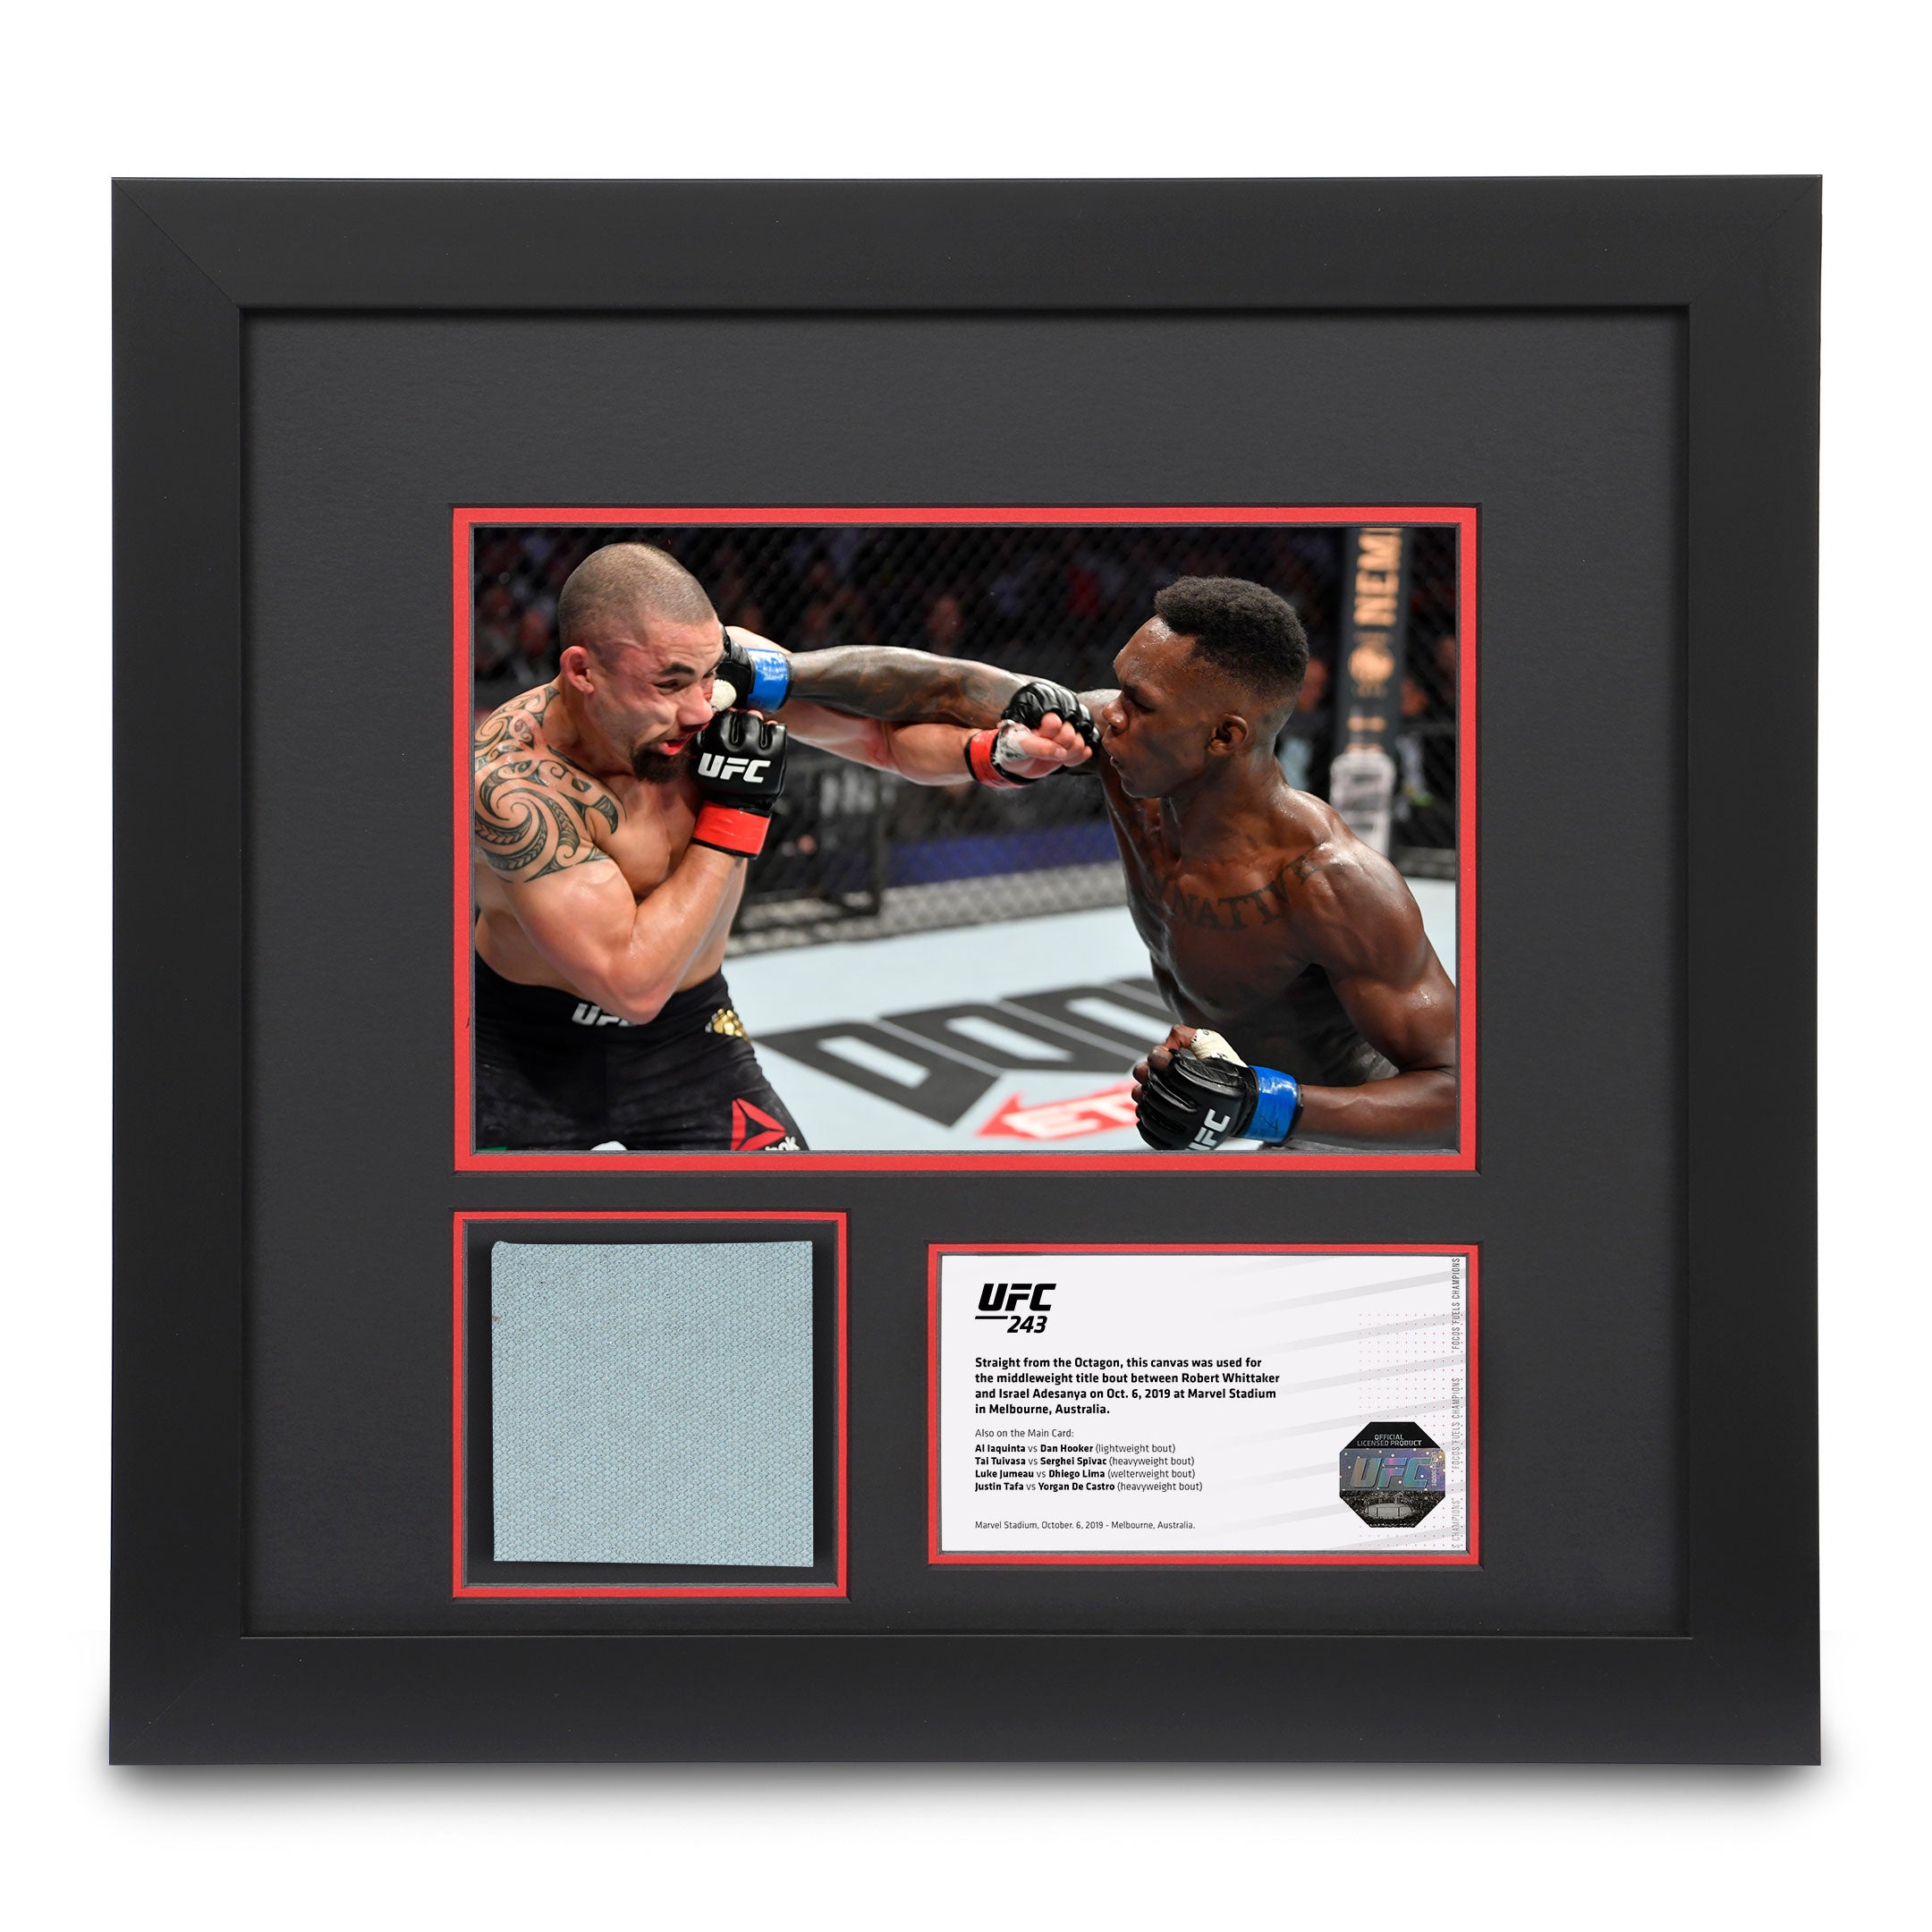 Show Your Support for Israel Adesanya with Exclusive Merchandise